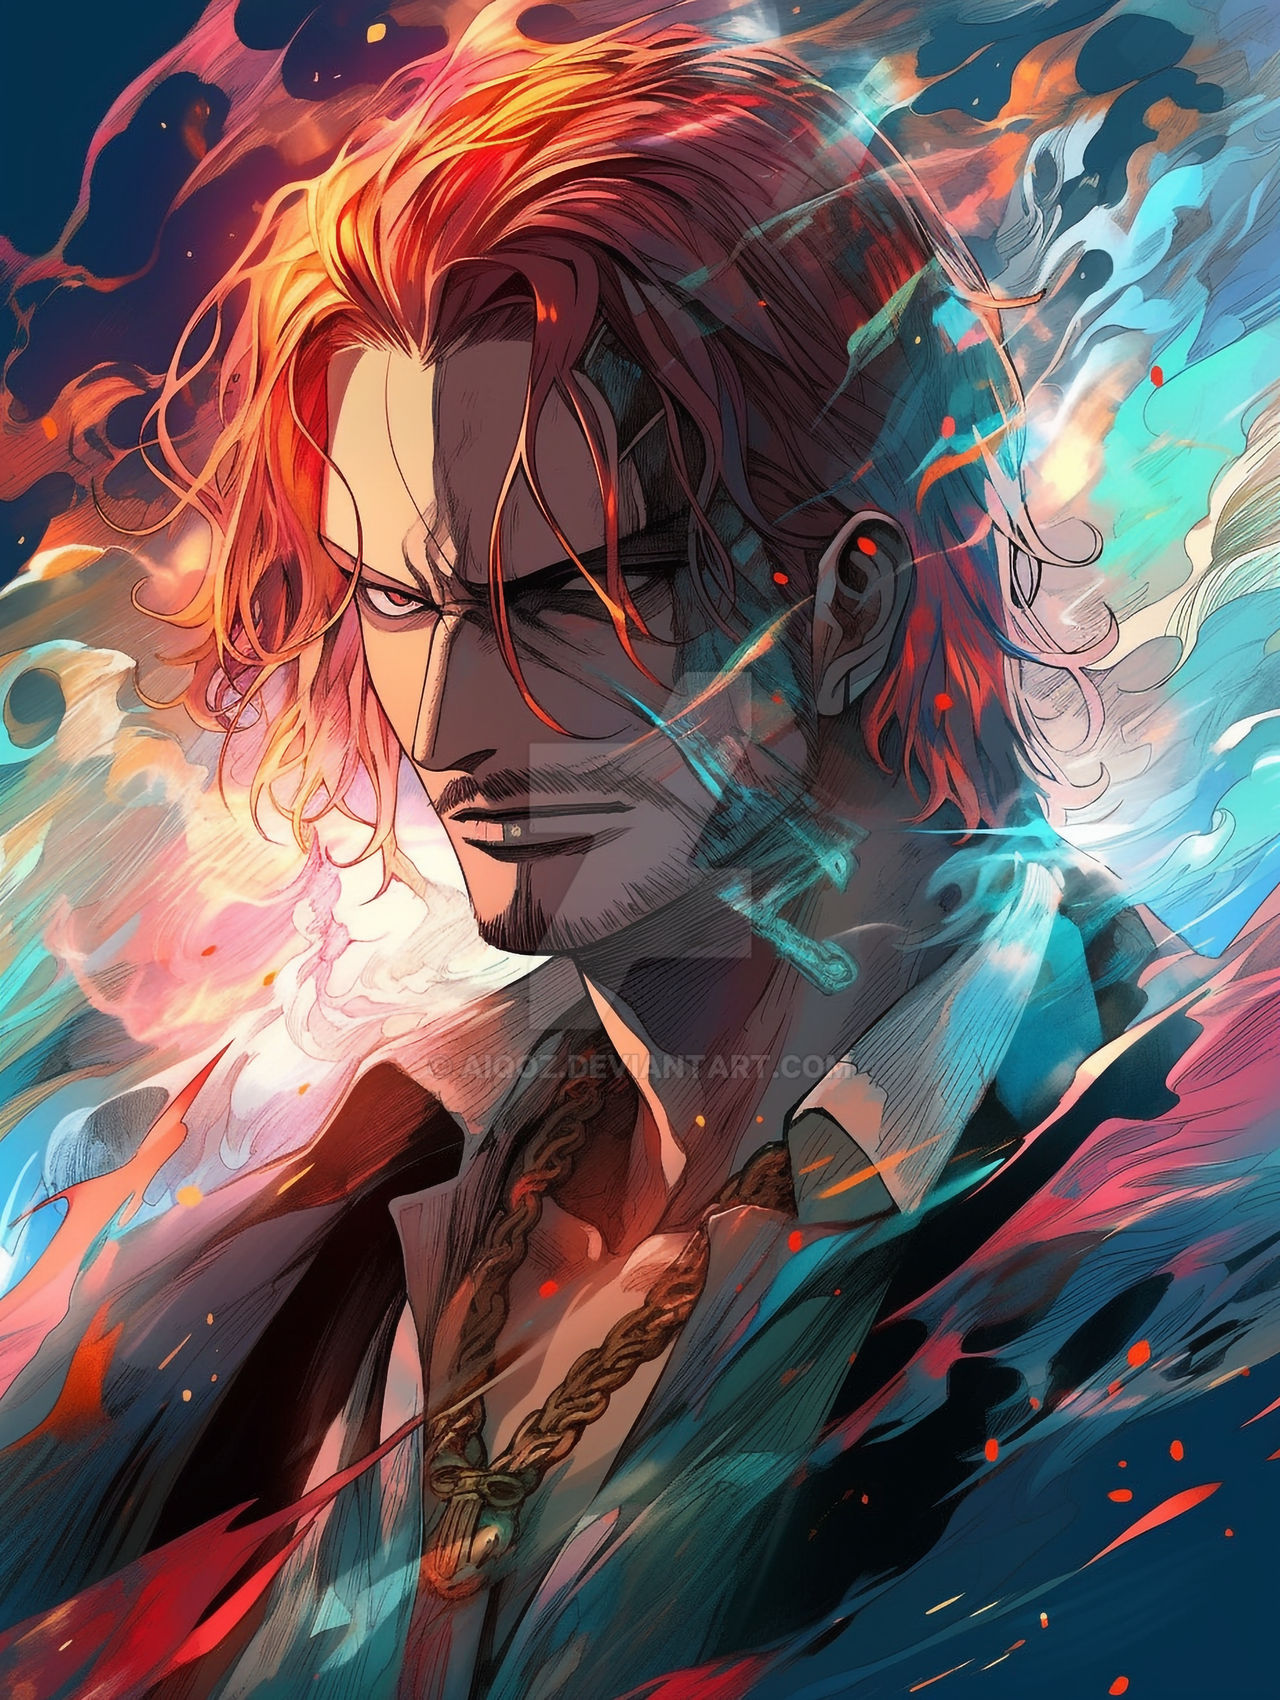 Shanks - One Piece by Aiqoz on DeviantArt